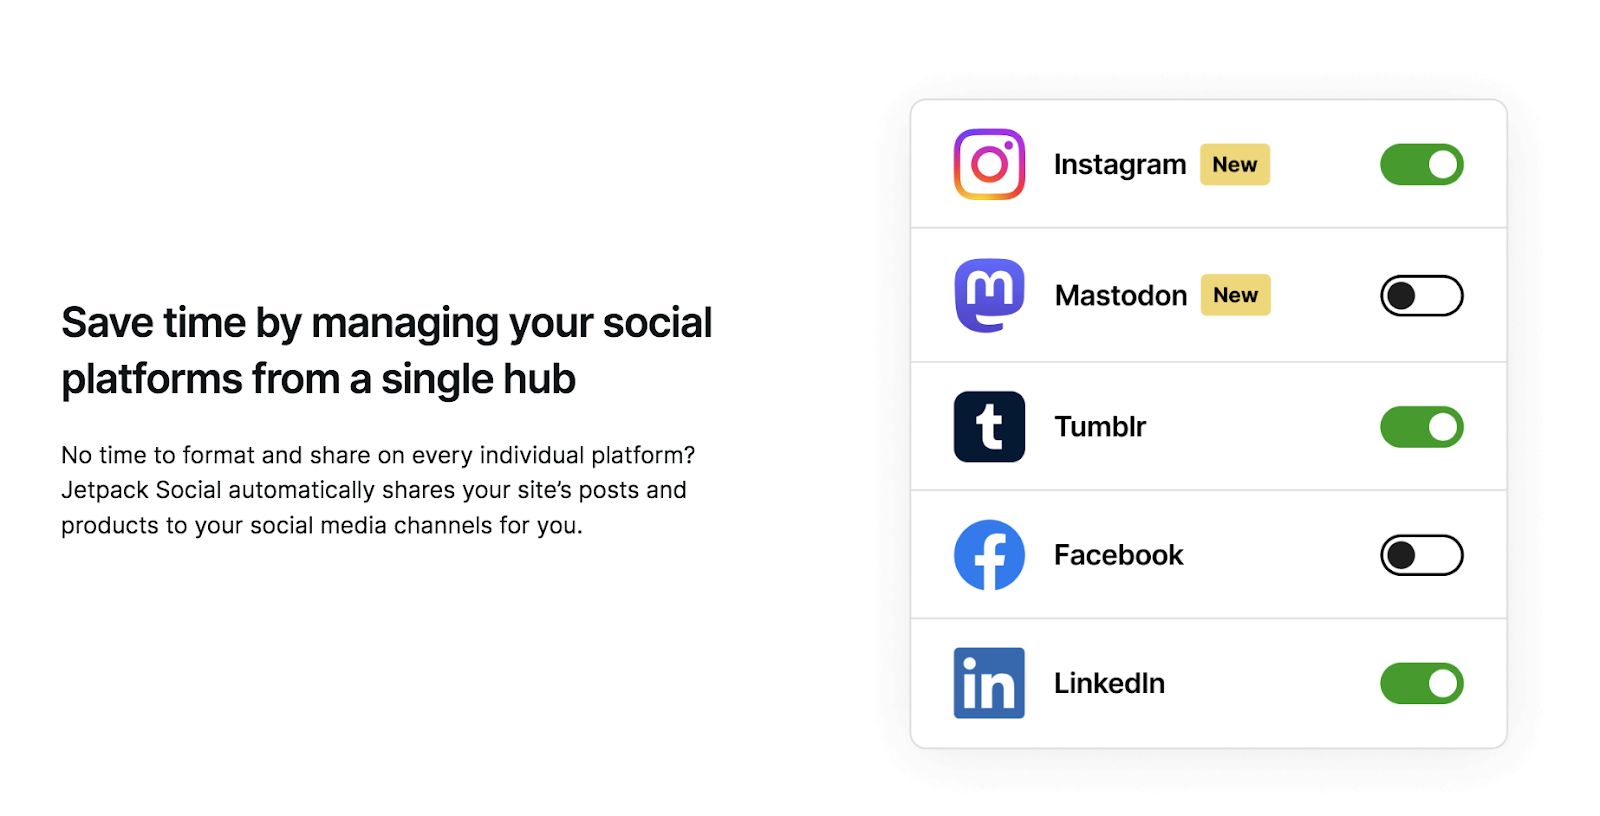 Jetpack Social enables you to connect to all of the above platforms as well as Tumblr and Mastodon.